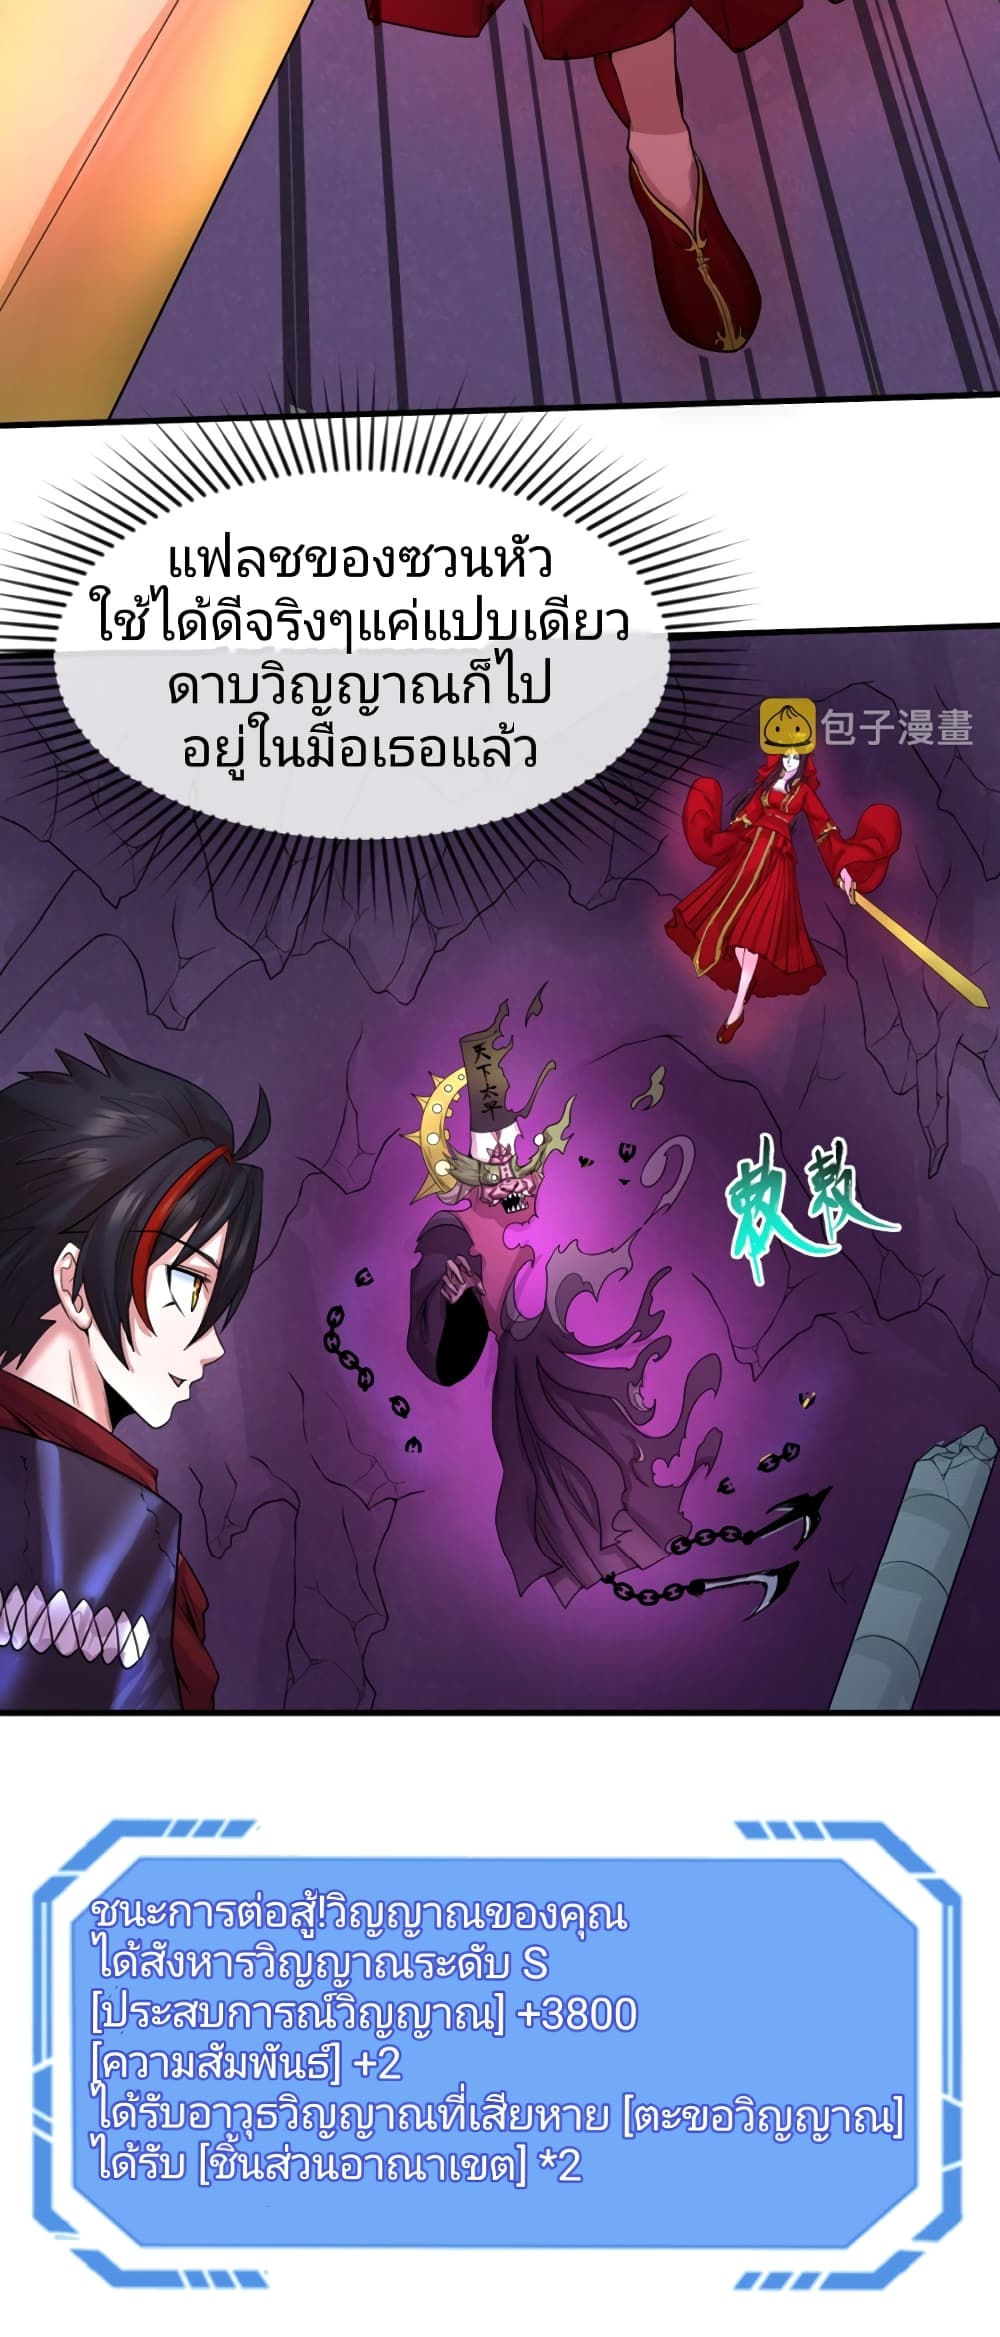 The Age of Ghost Spirits à¸à¸­à¸à¸à¸µà¹ 30 (22)